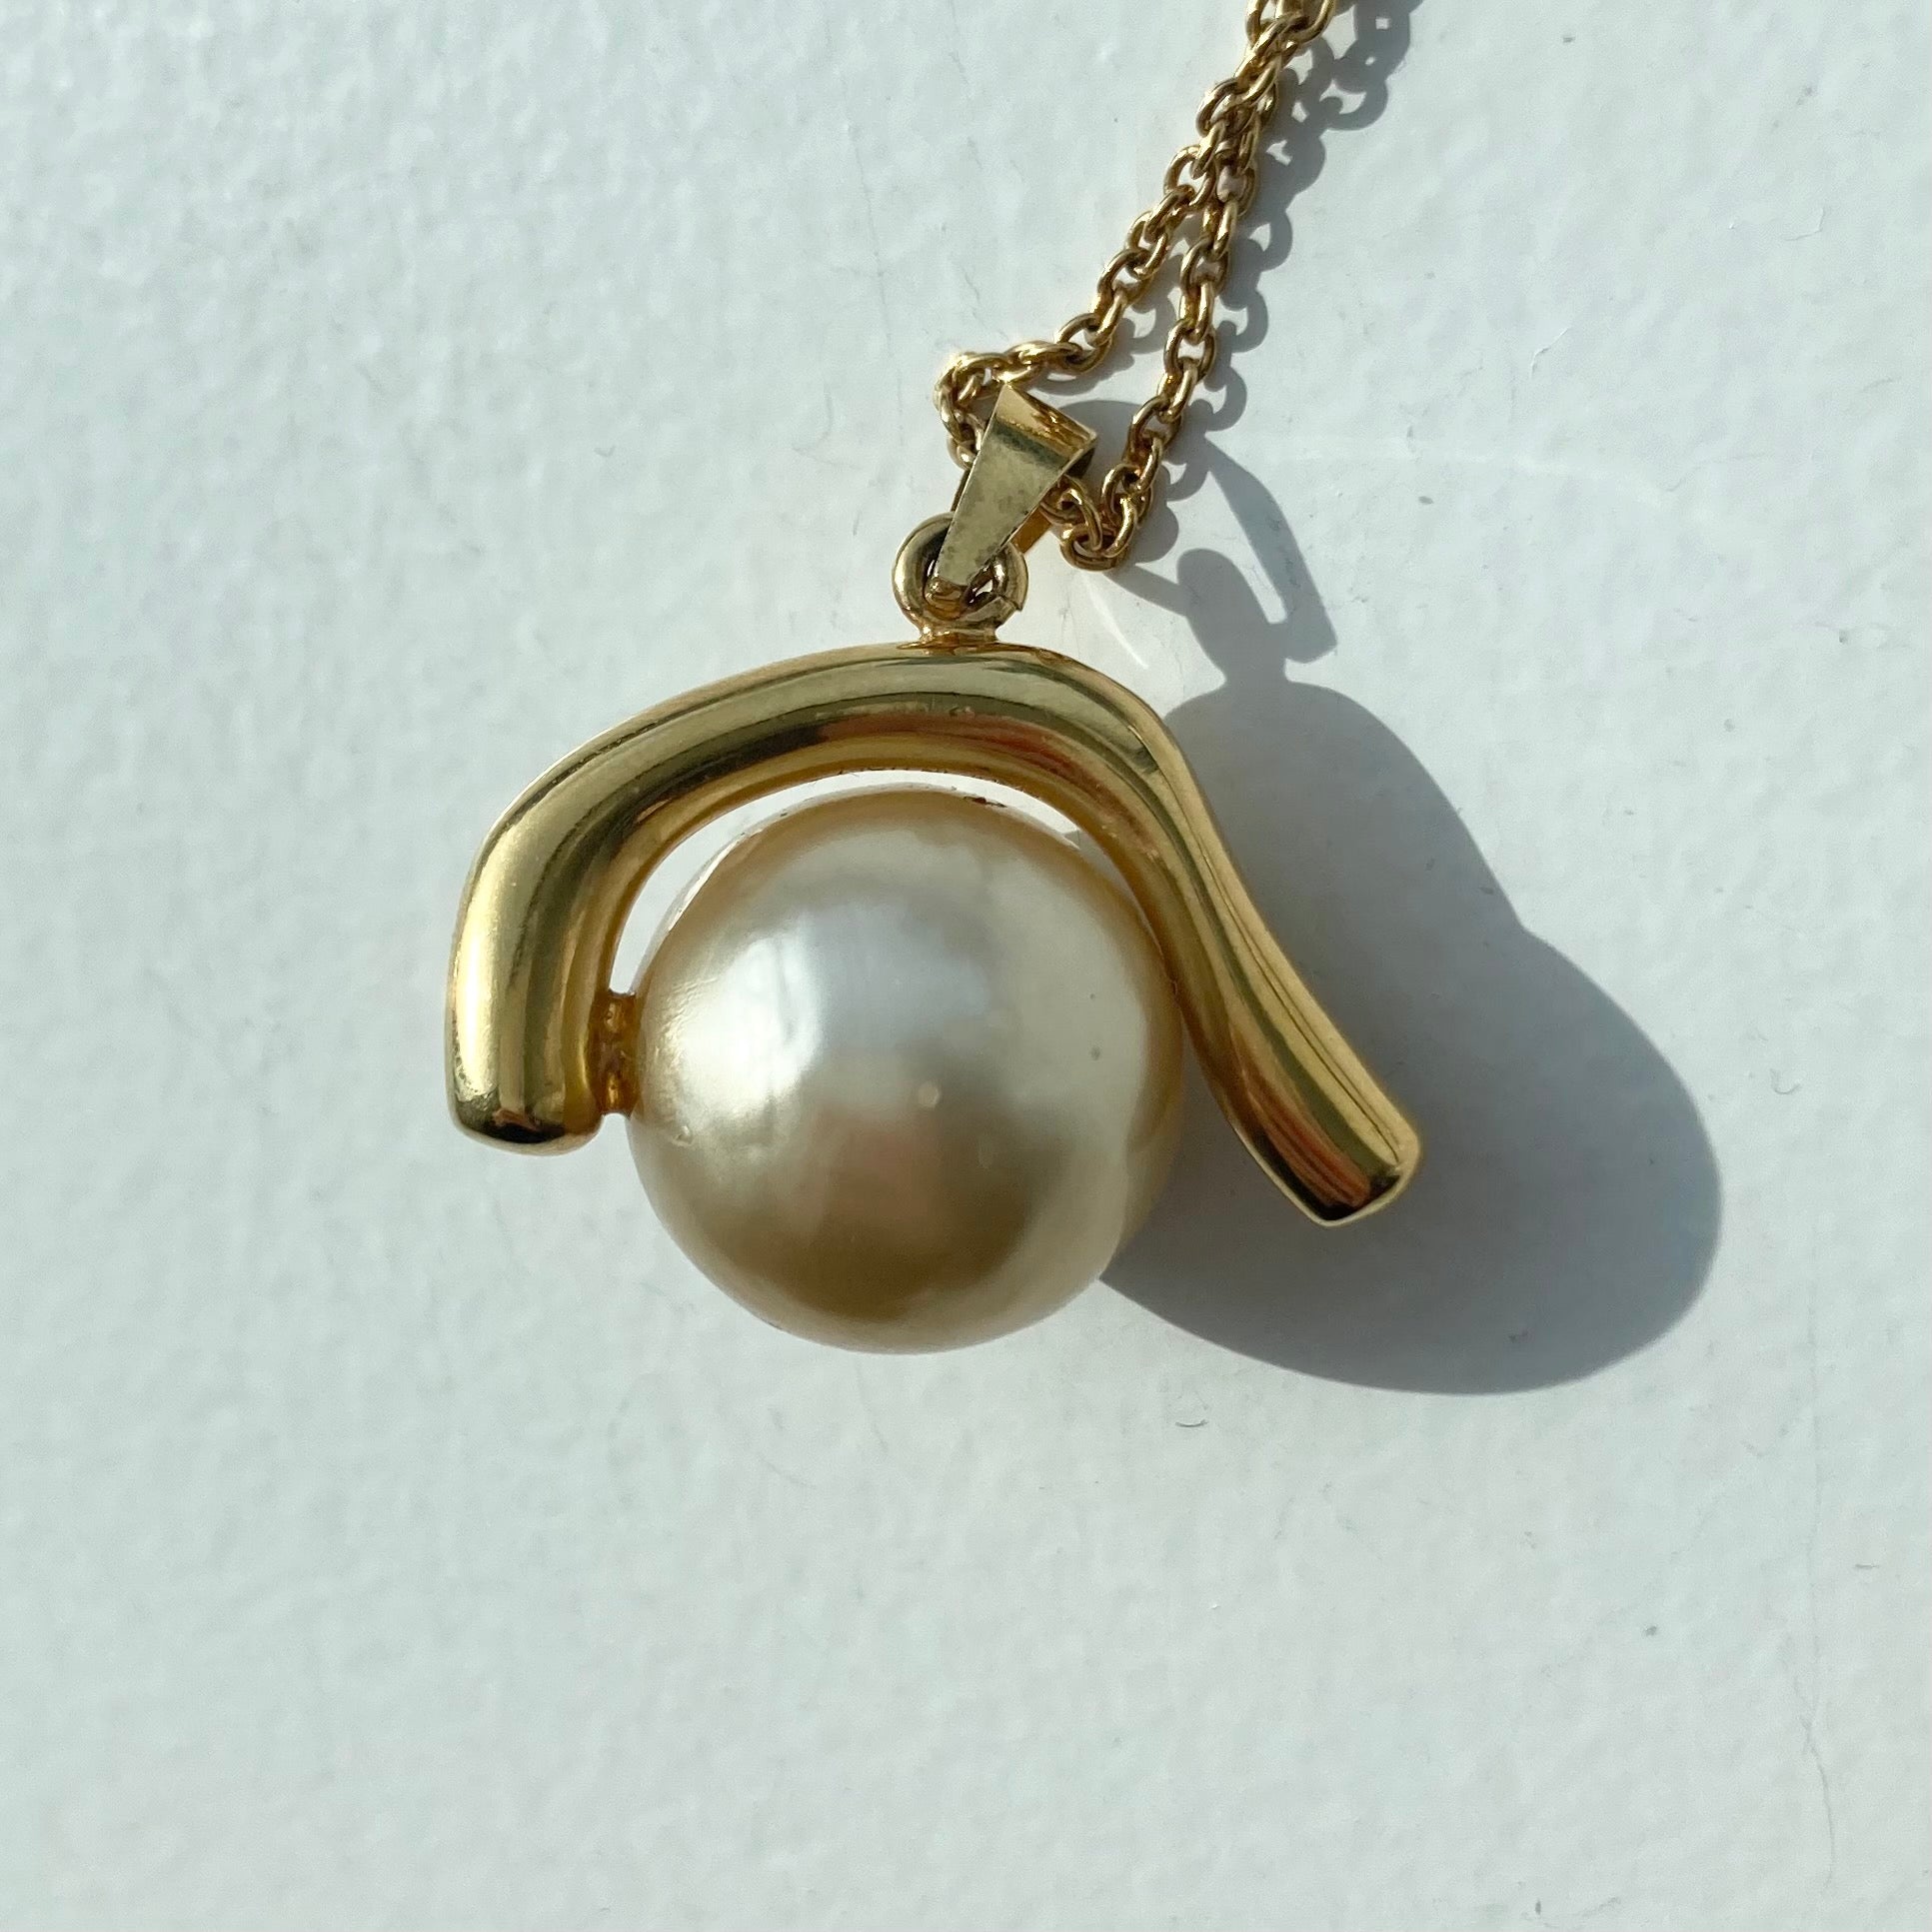 Celine by Phoebe Philo Fake pearl necklace セリーヌ フィービー期 